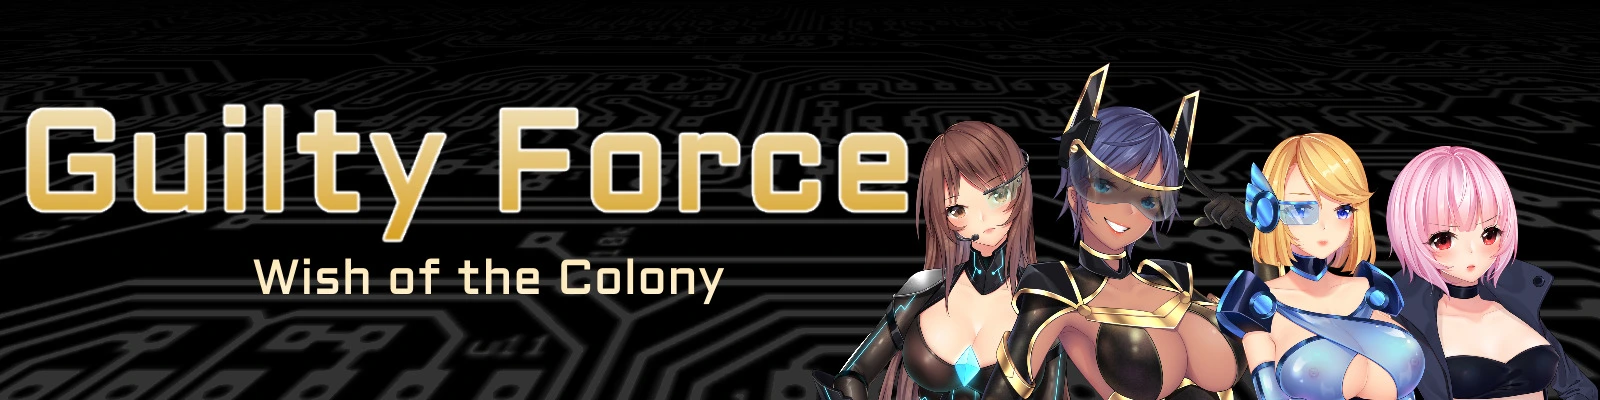 Guilty Force: Wish of the Colony [v0.215] main image